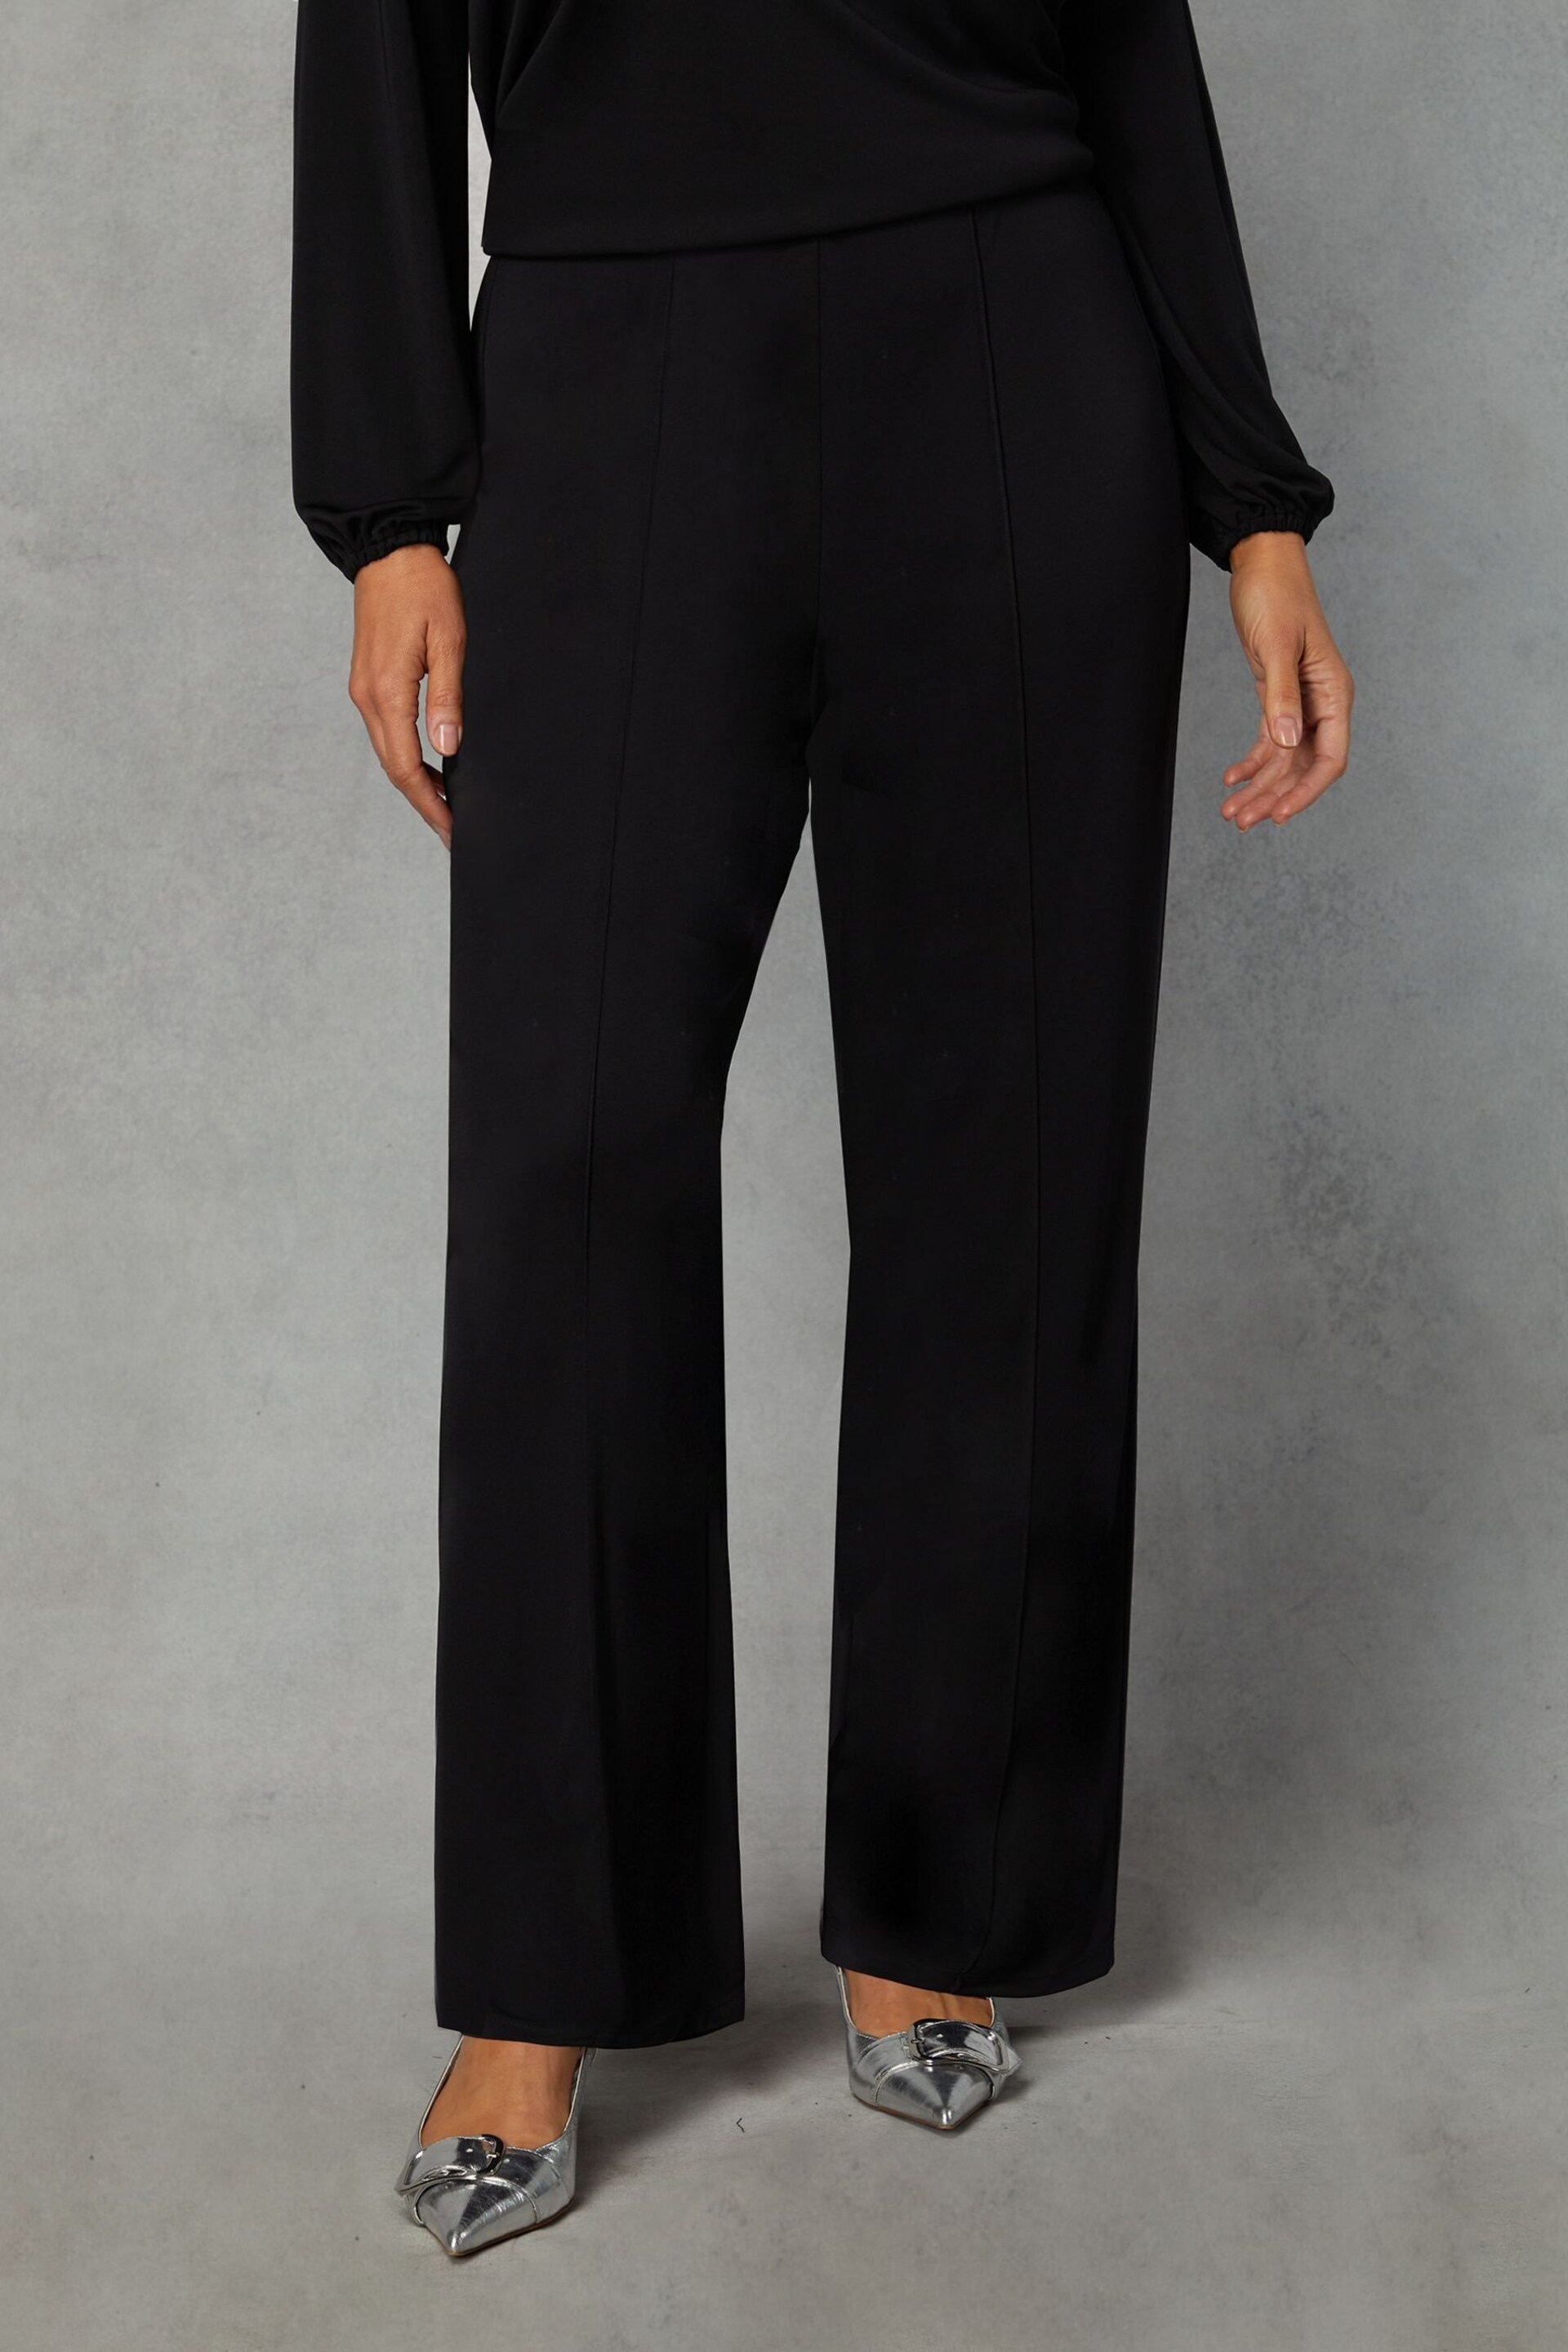 Live Unlimited Curve - Petite Jersey Bootleg Black Trousers - Image 1 of 4